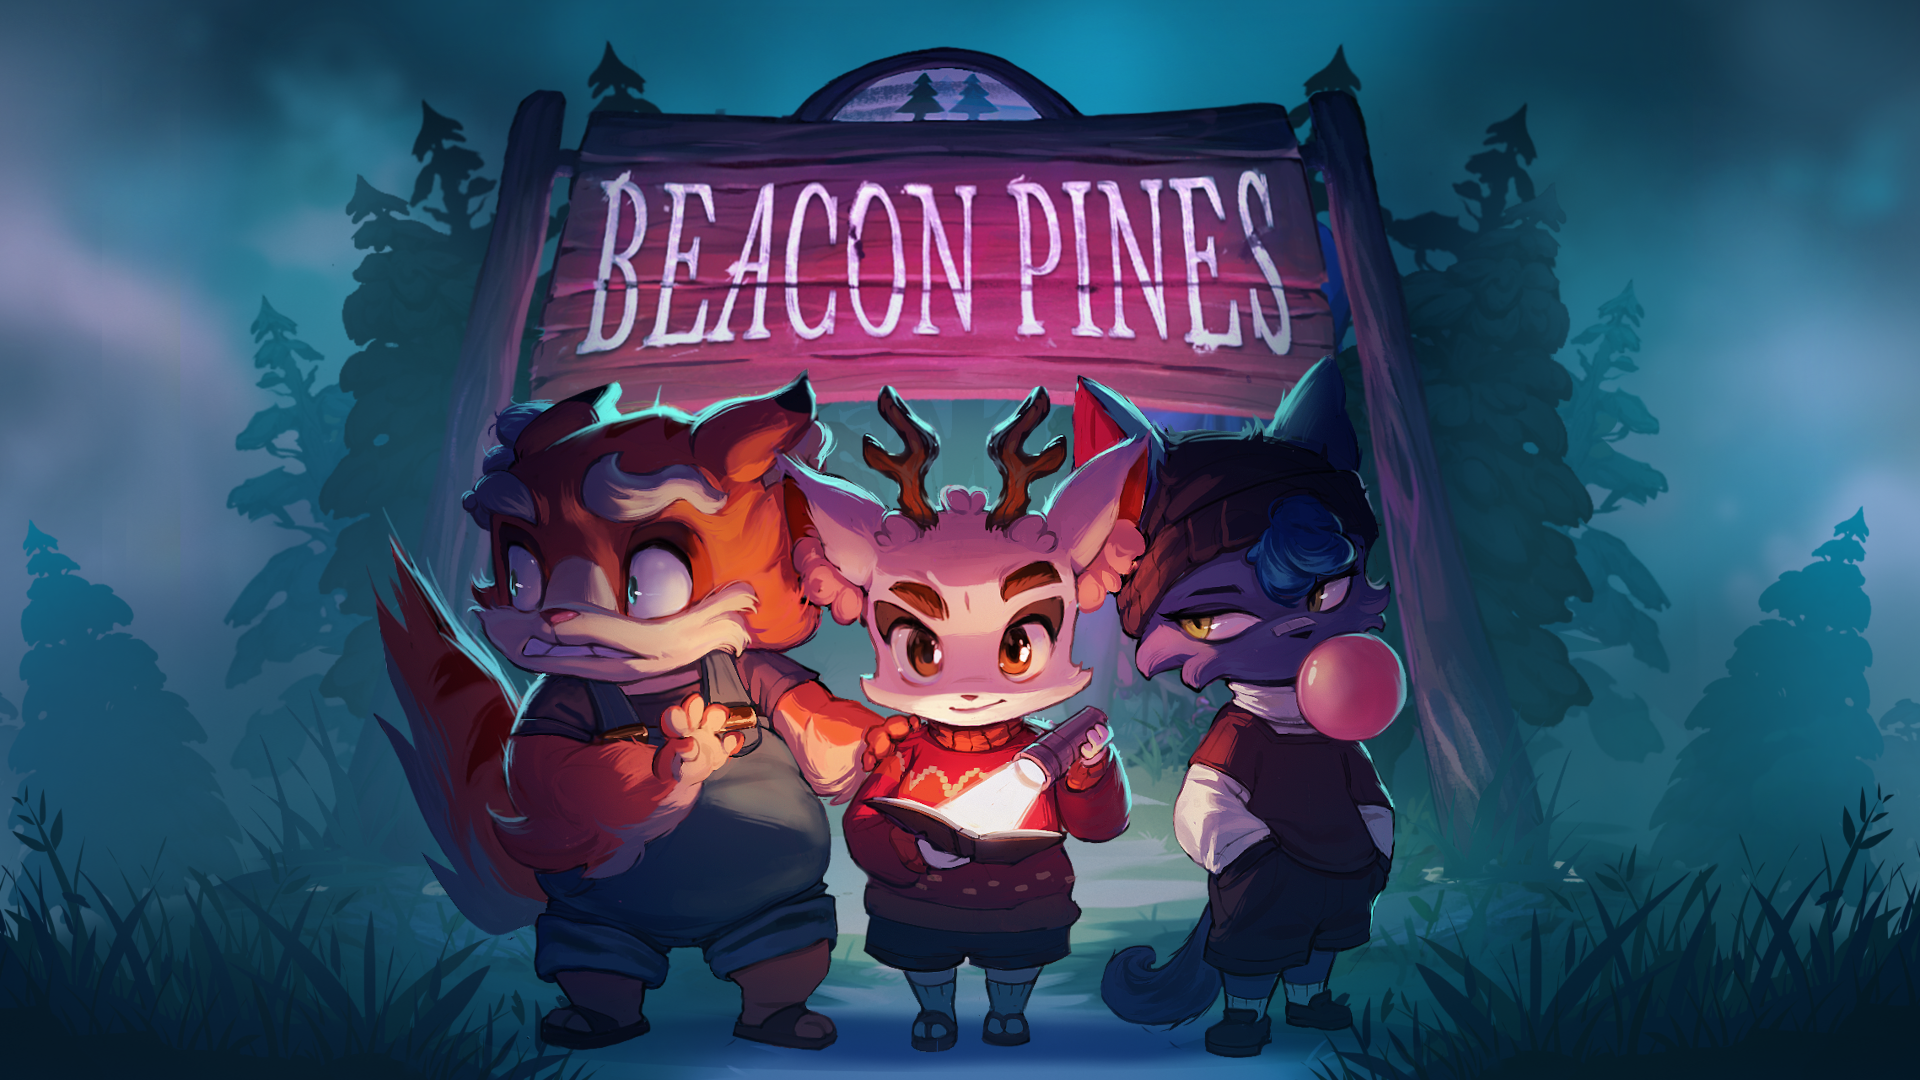 Beacon Pines review – A place both wonderful and strange